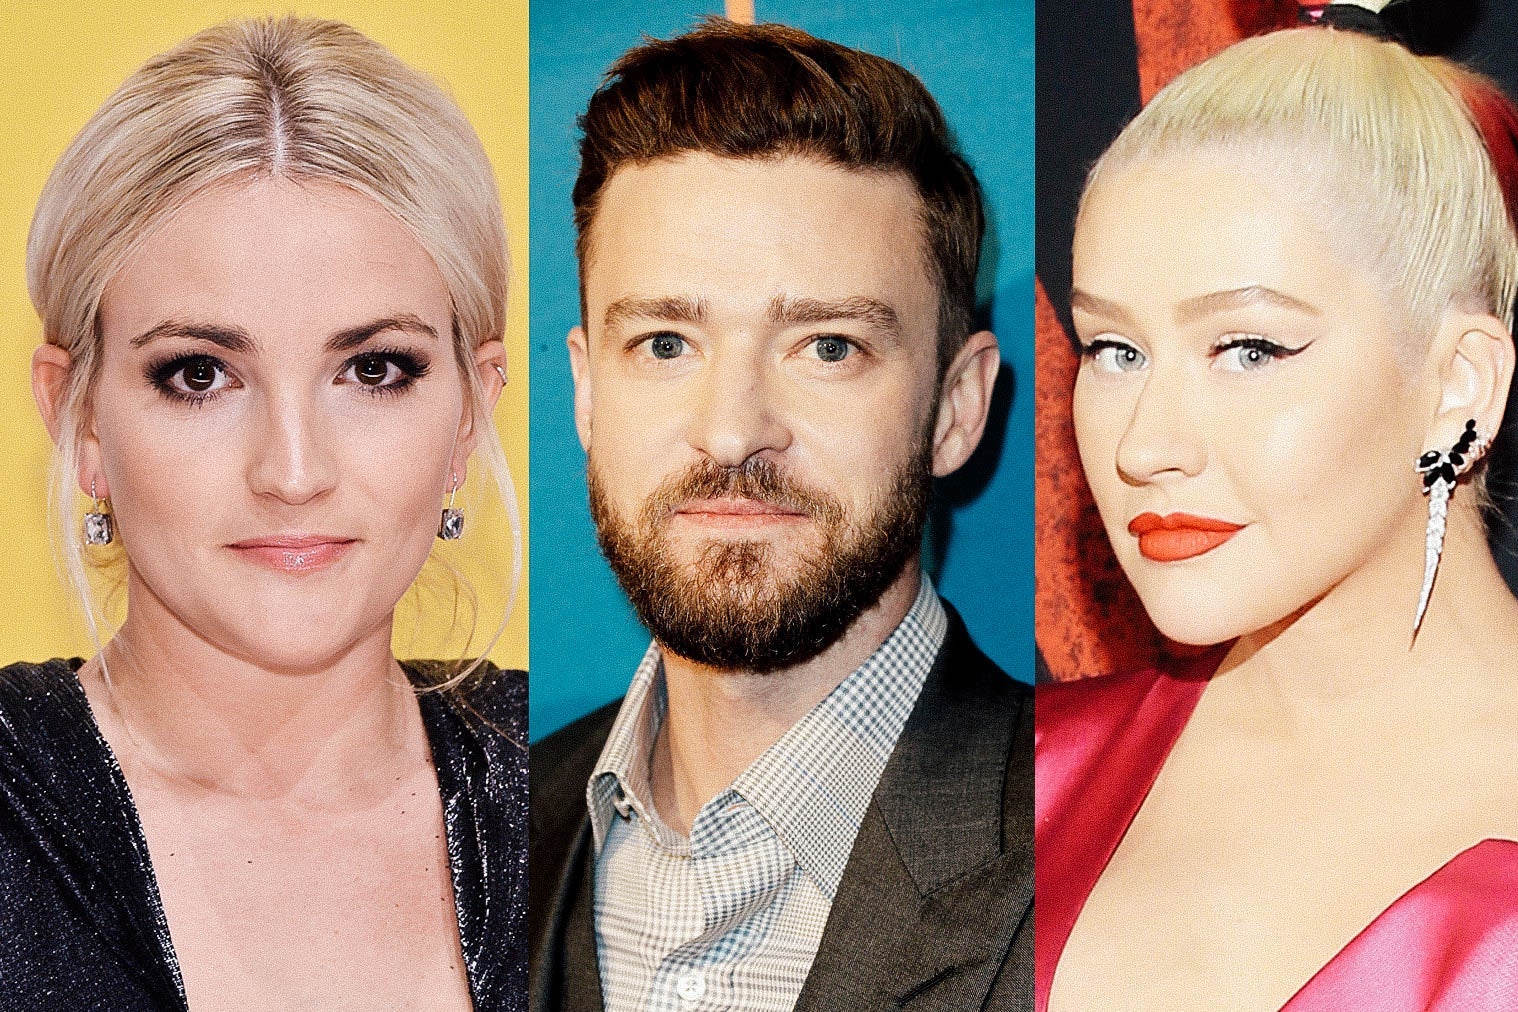 Side by side photos of Jamie Lynn Spears, Justin Timberlake, and Christina Aguilera